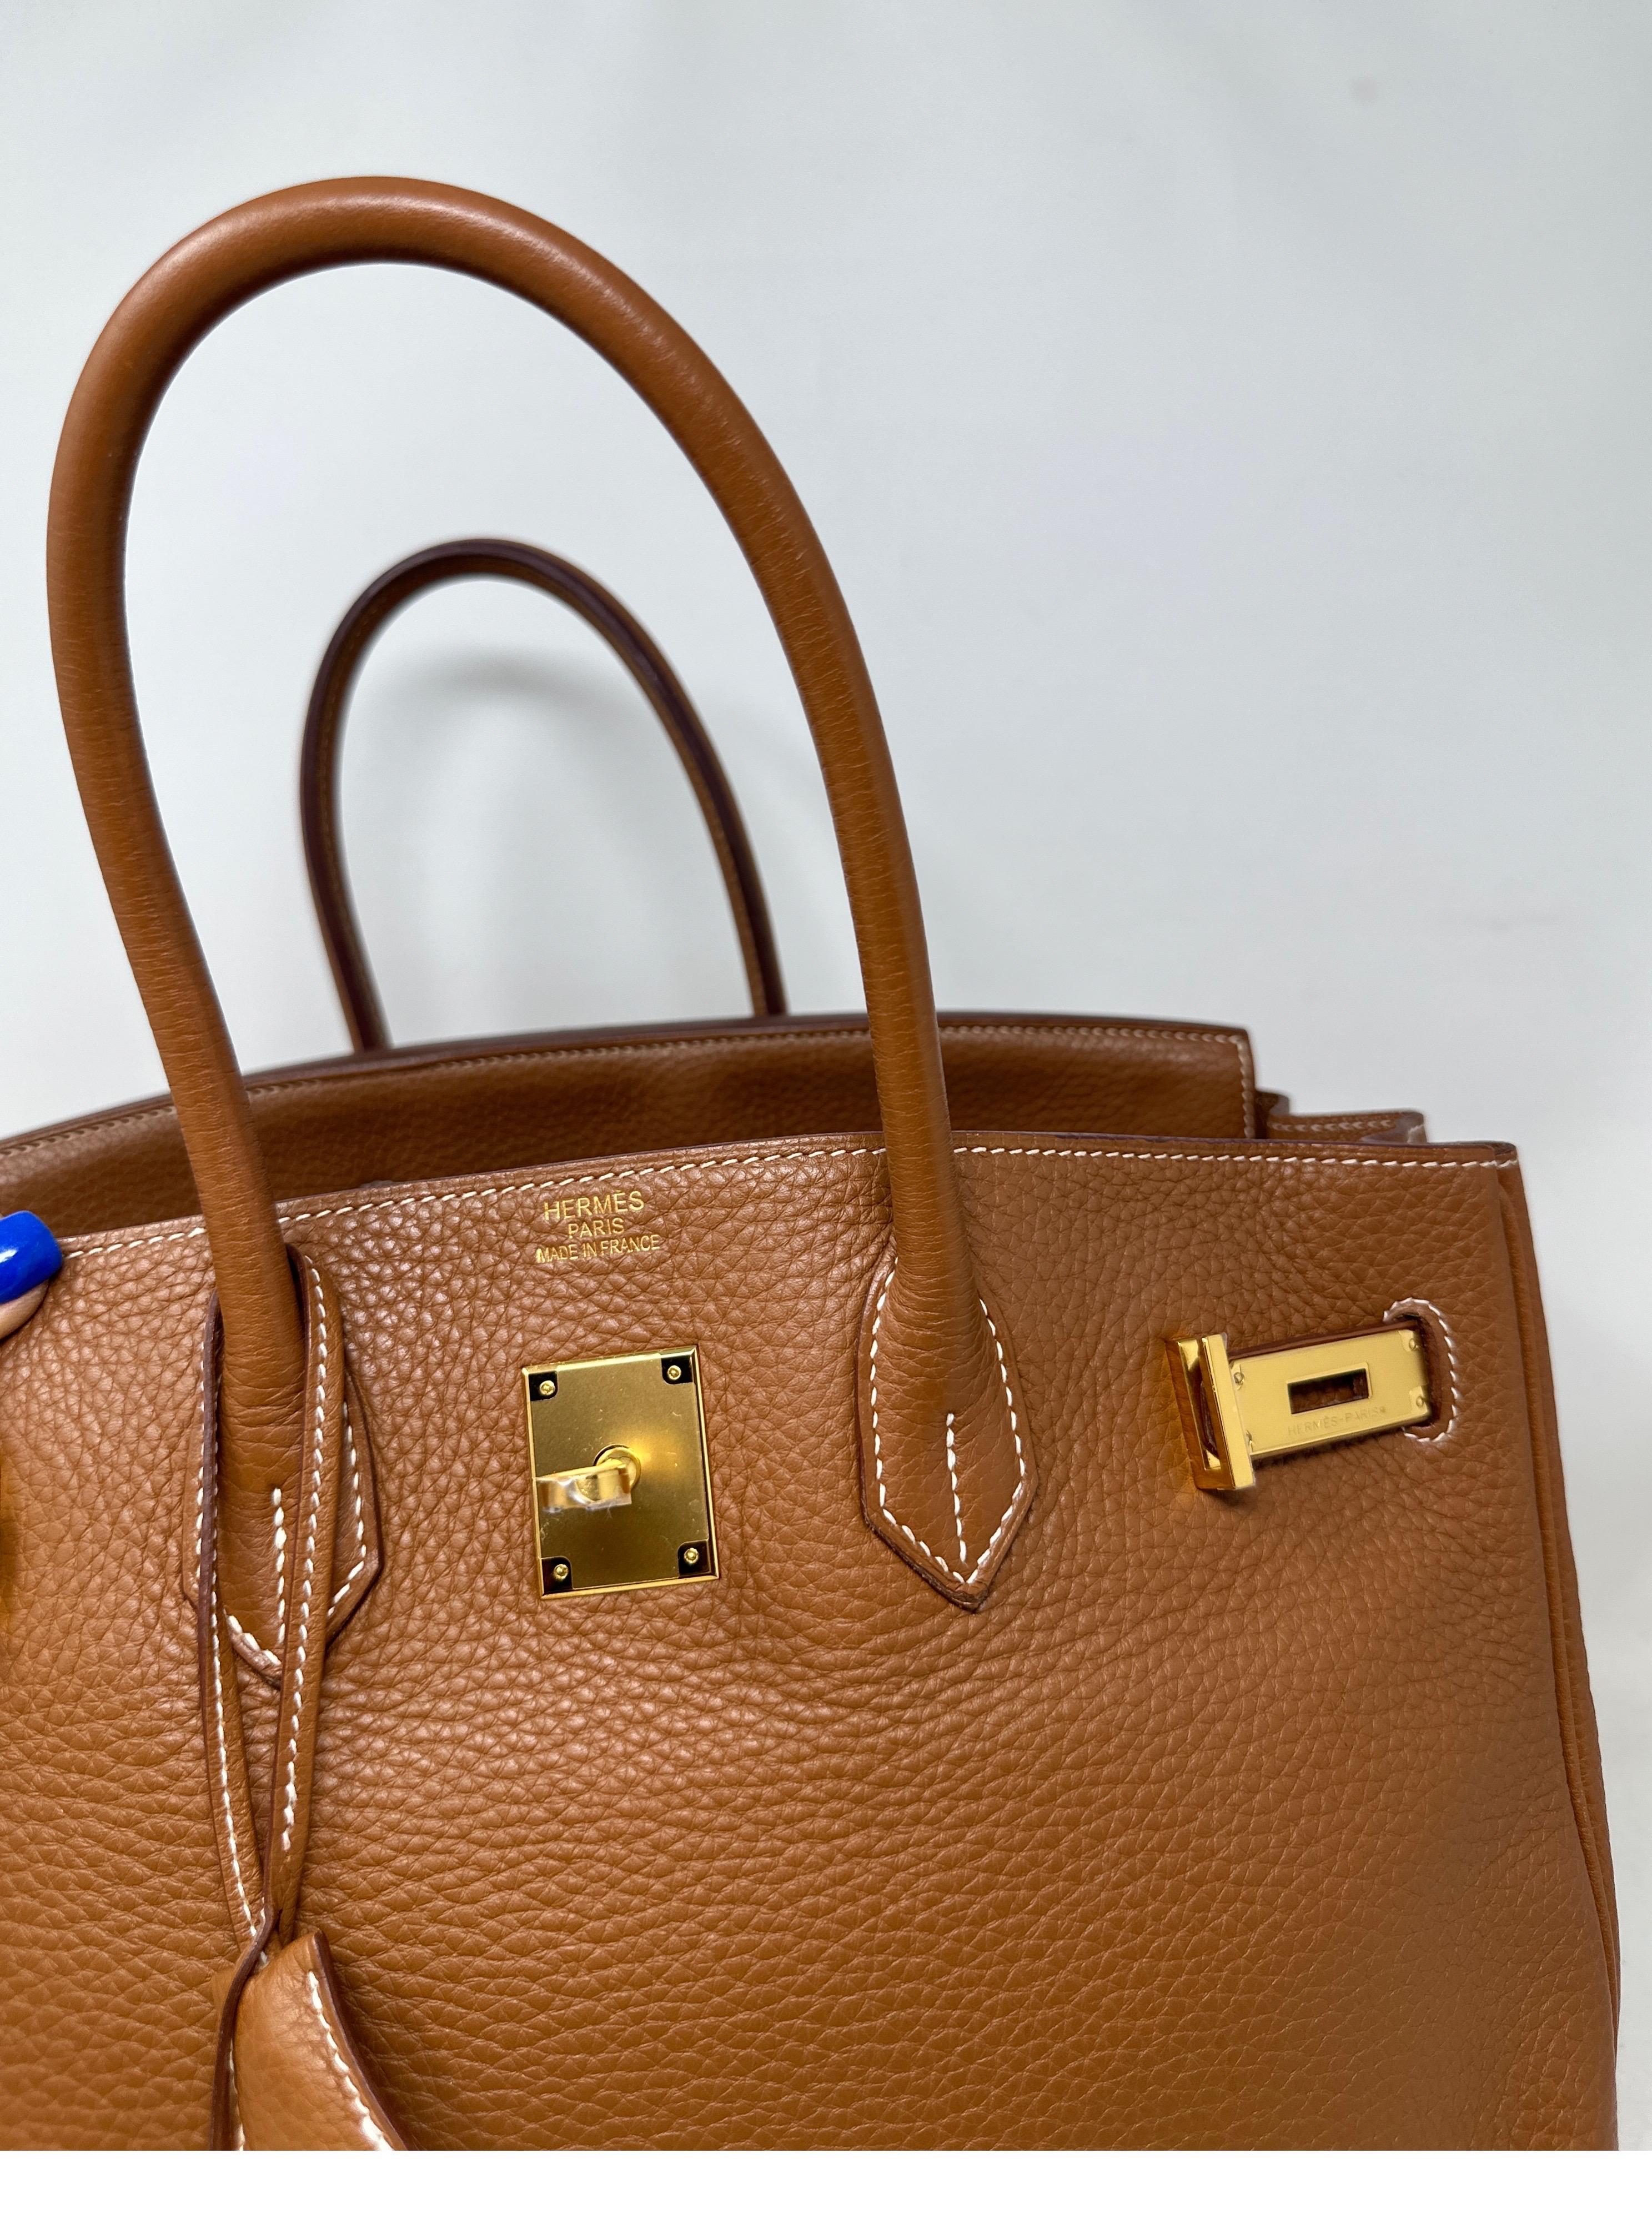 Hermes Gold Birkin 35 Bag  In Excellent Condition For Sale In Athens, GA